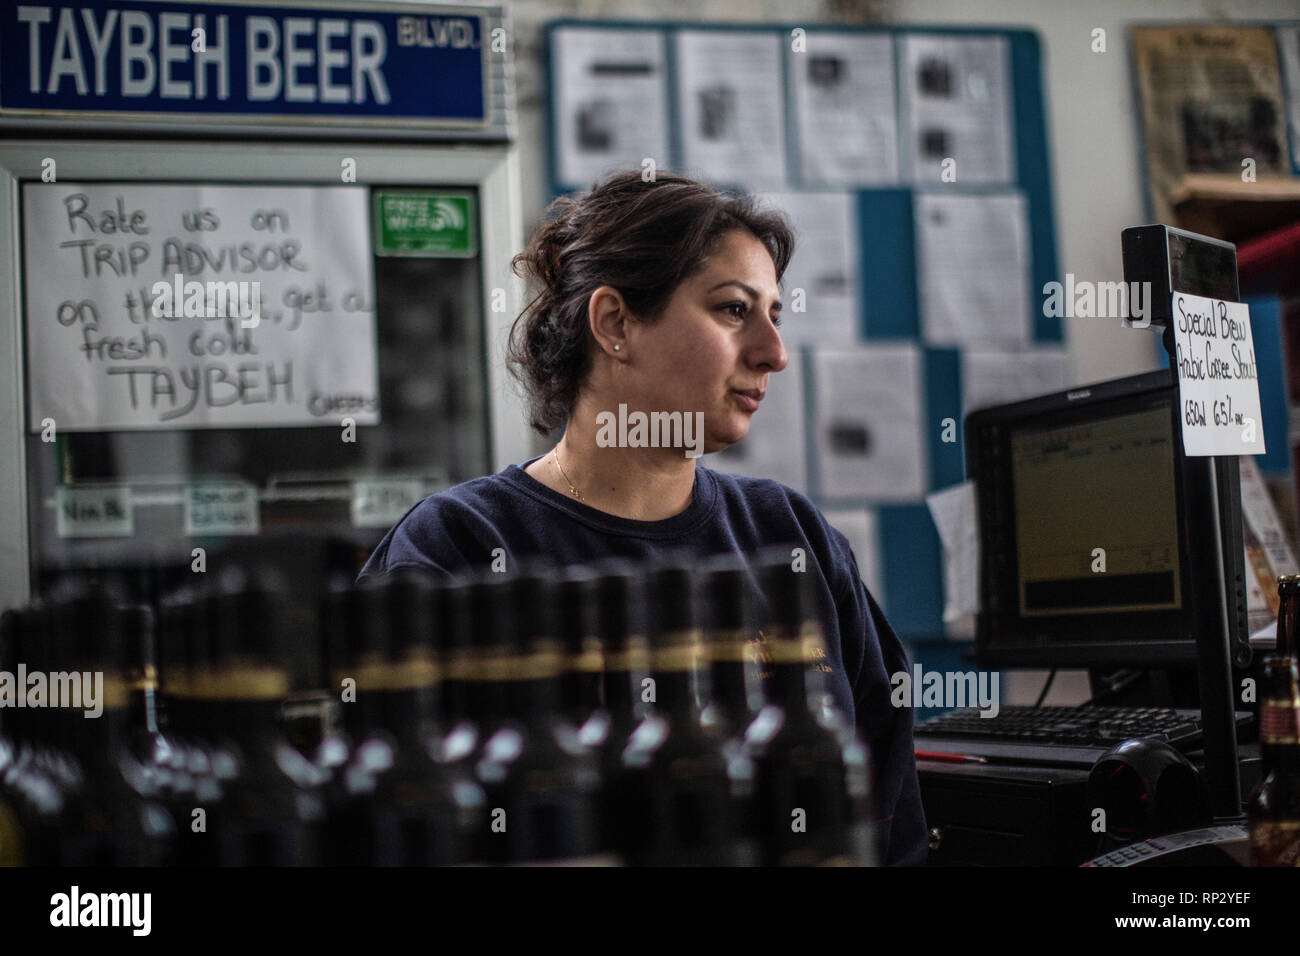 Taybeh, Palestine. Autonomous Areas. 06th Feb, 2019. Madis Churi, head of the 'Taybeh' brewery and the only female brewer in the Arab world, stands in her brewery near Ramallah. The family brewery 'Taybeh' was opened 25 years ago. (to dpa 'Palestinian woman brews beer according to German purity law' of 21.02.2019) Credit: Ilia Yefimovich/dpa/Alamy Live News Stock Photo